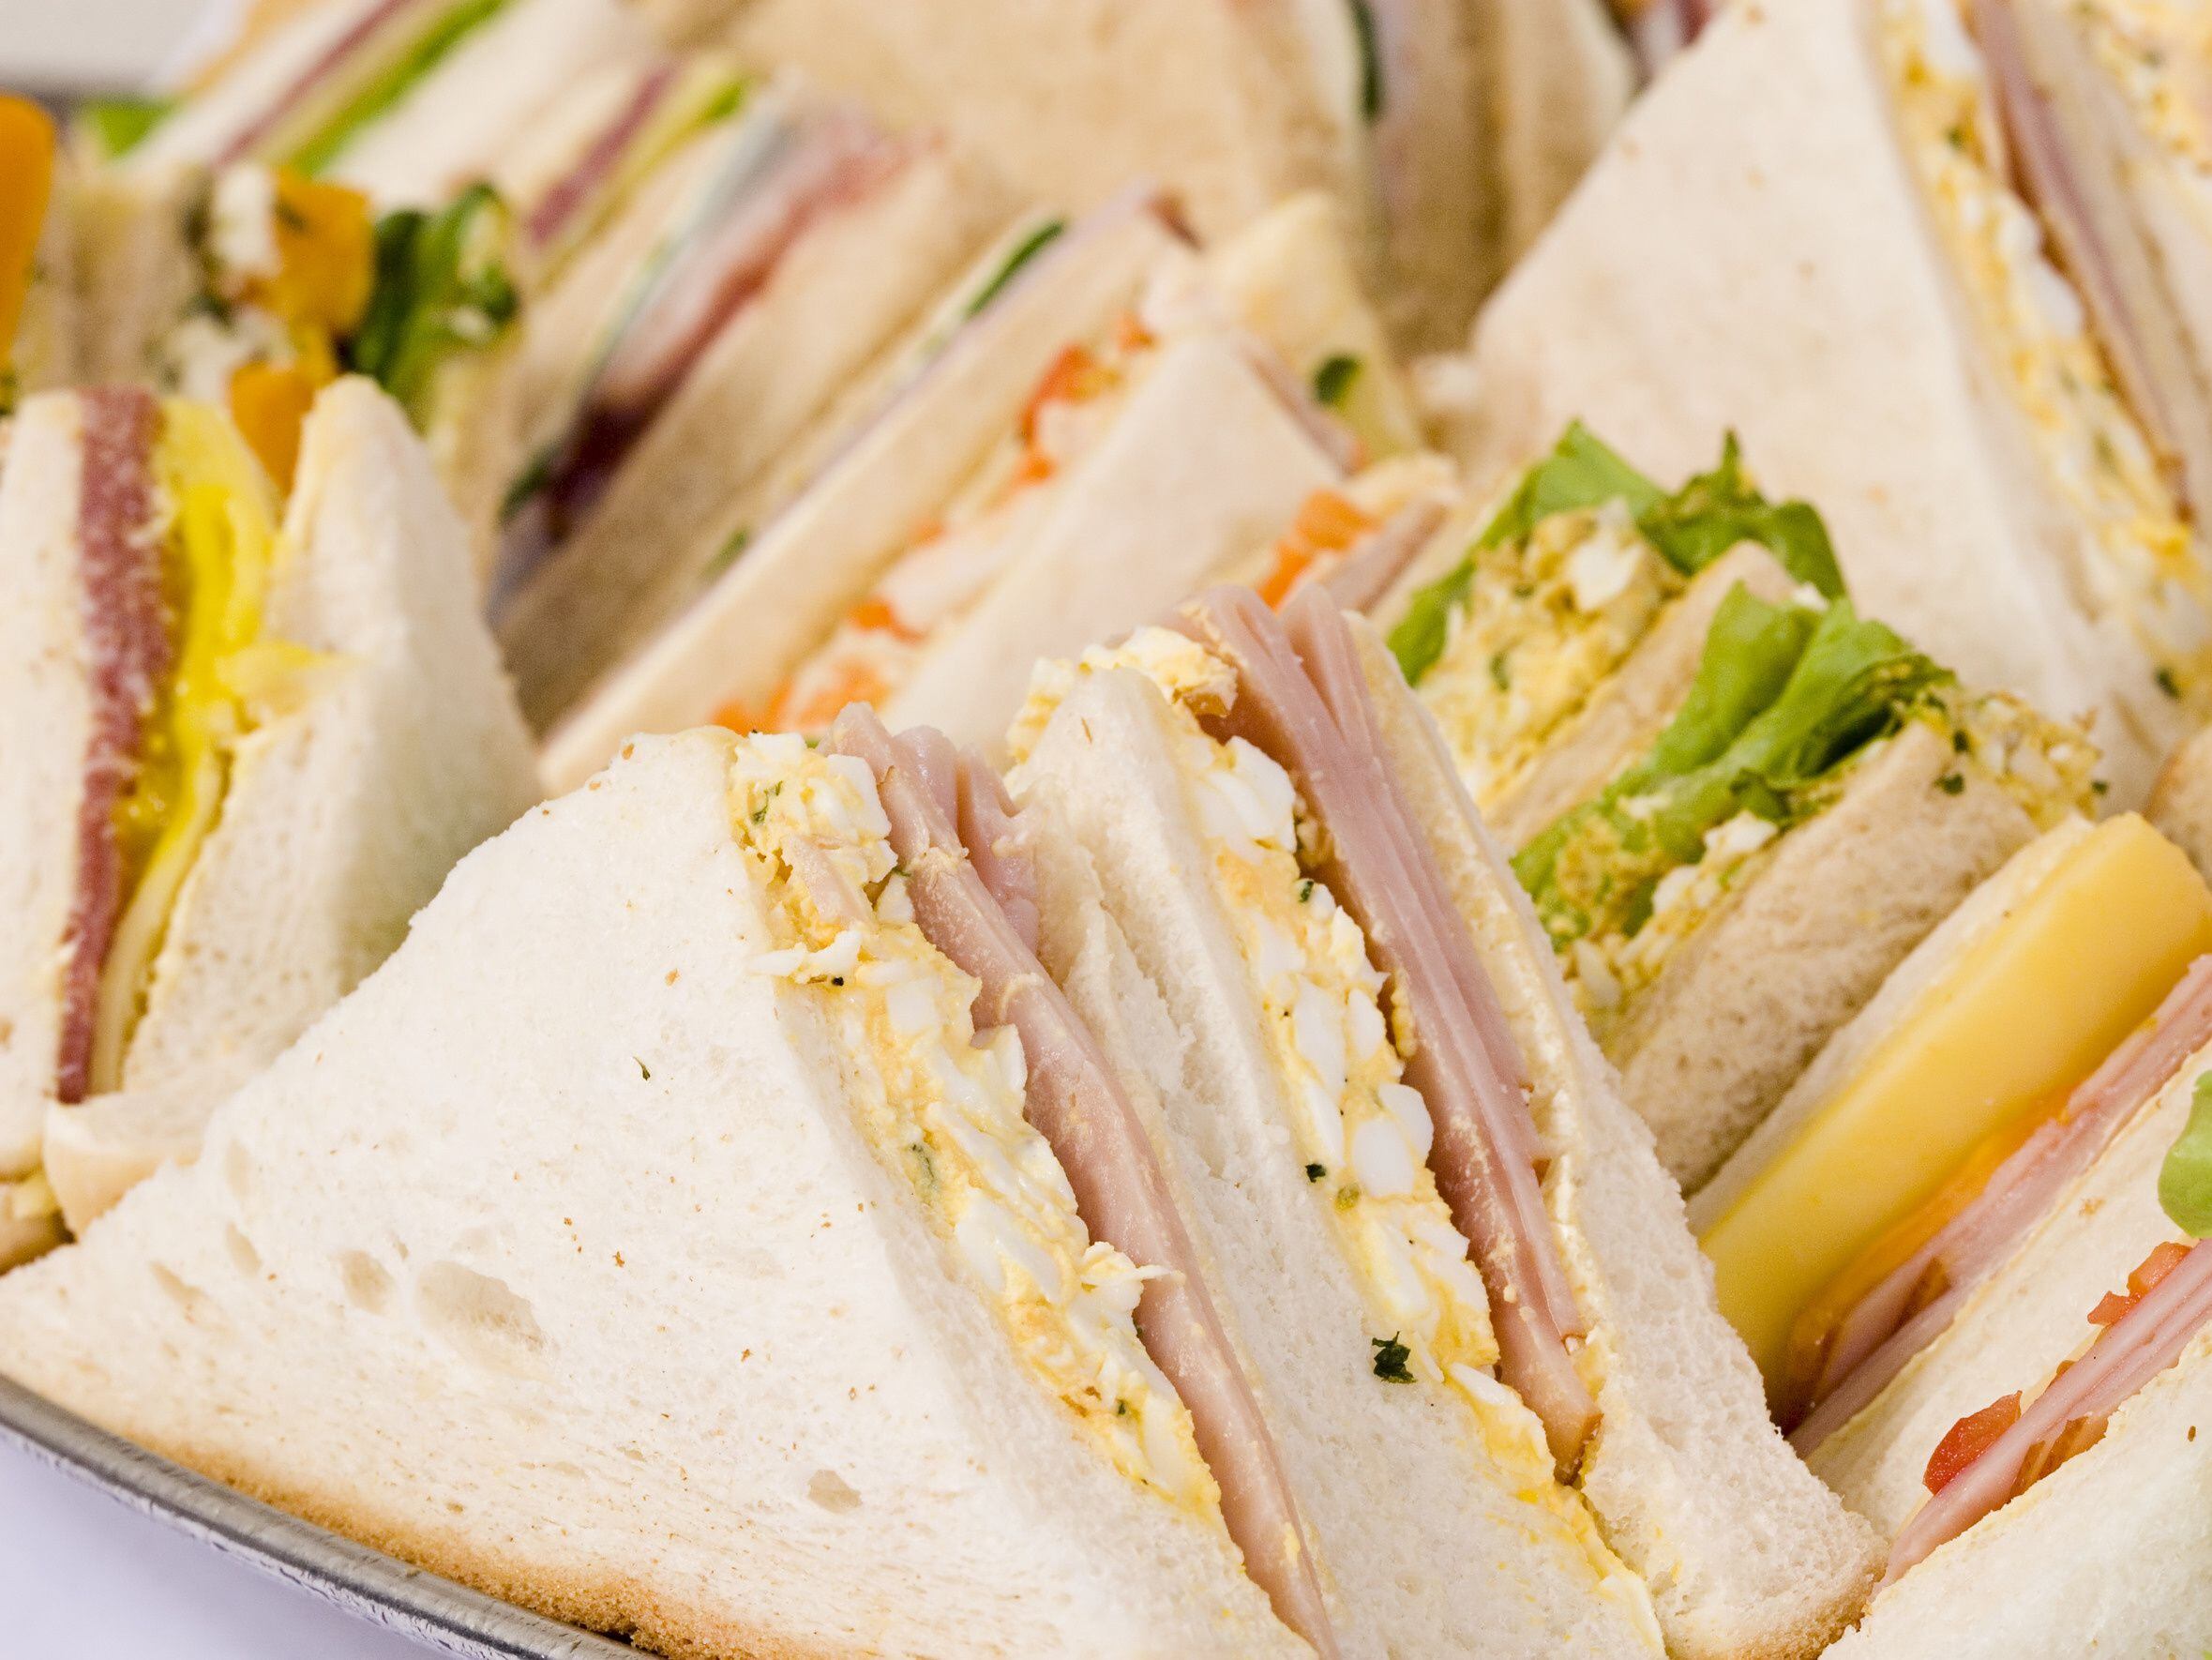 Dozens of varieties of shop-bought sandwiches recalled over listeria risk